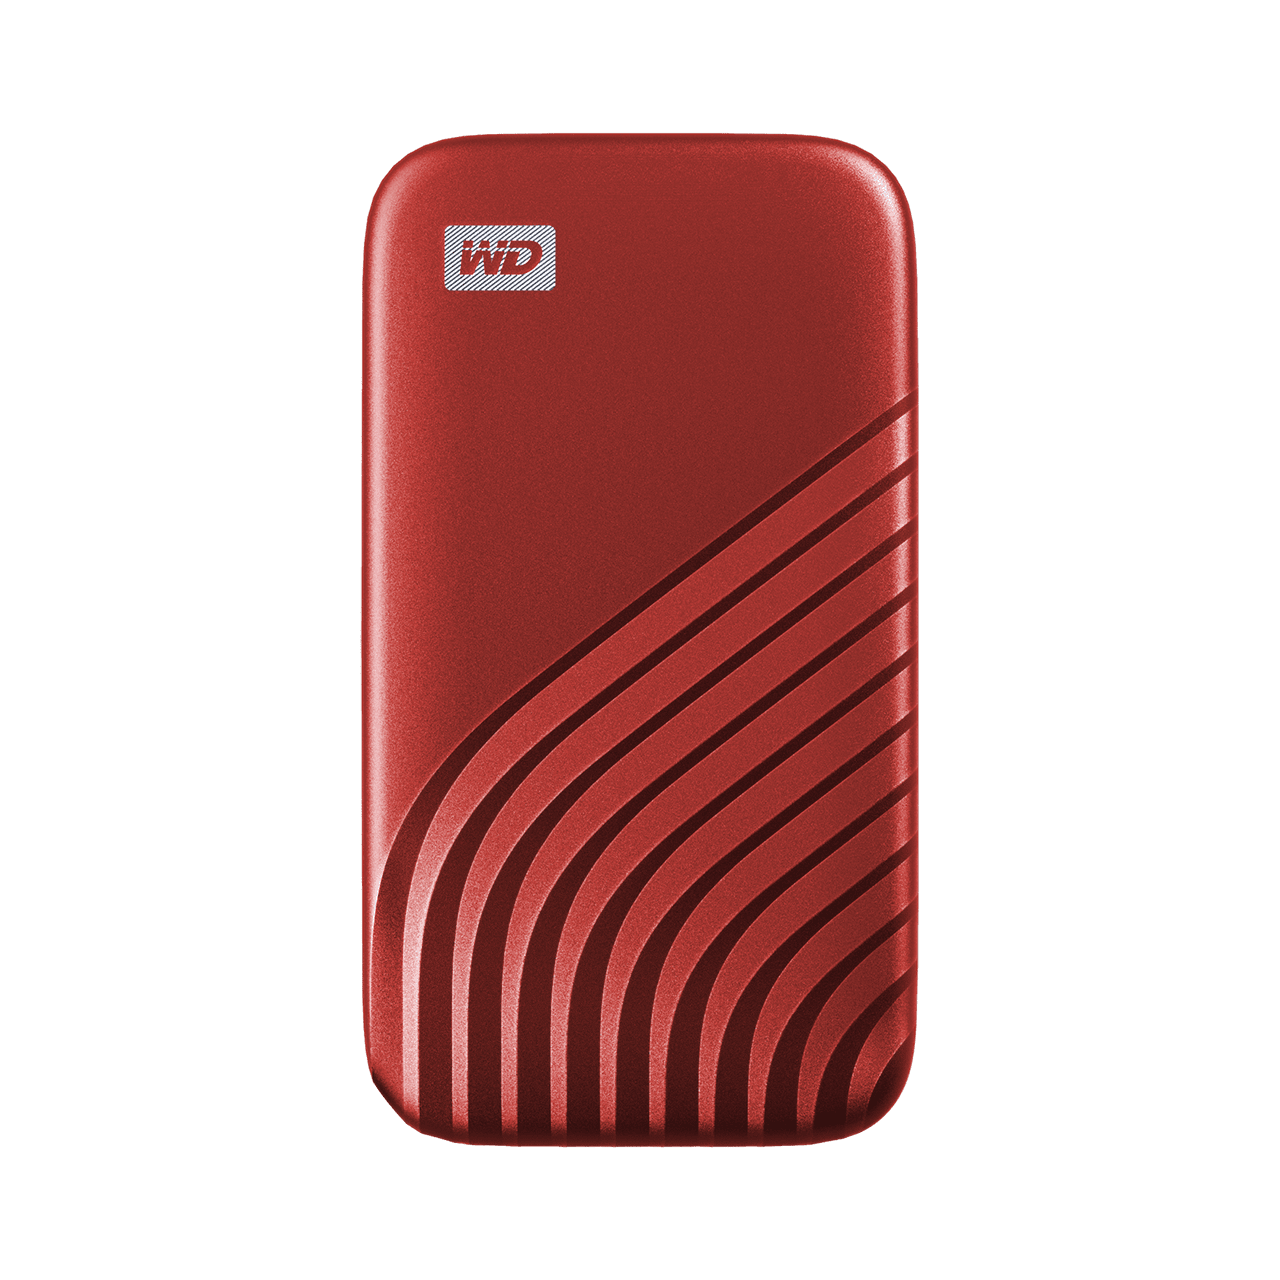 WD Western Digital My Passport SSD Portable External SSD with USB 3.2 Gen 2, Up To 1050mb/s Read Password Protection, Simple Back Up, Shock Resistant (500GB / 1TB / 2TB)